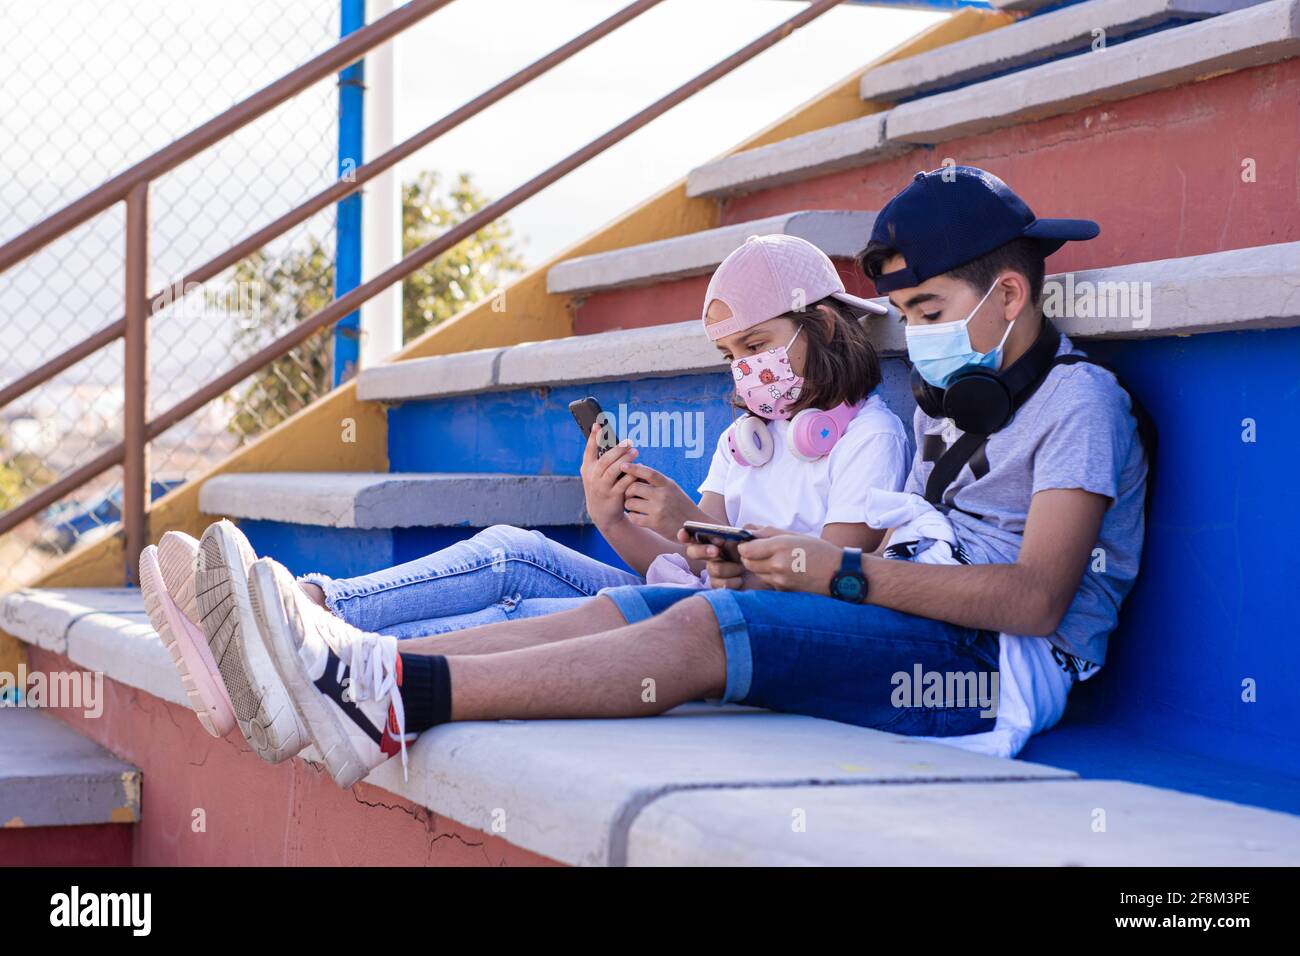 Two preteens, a boy and a girl, sitting on the bleachers with their masks on, use their mobile devices side by side. Stock Photo